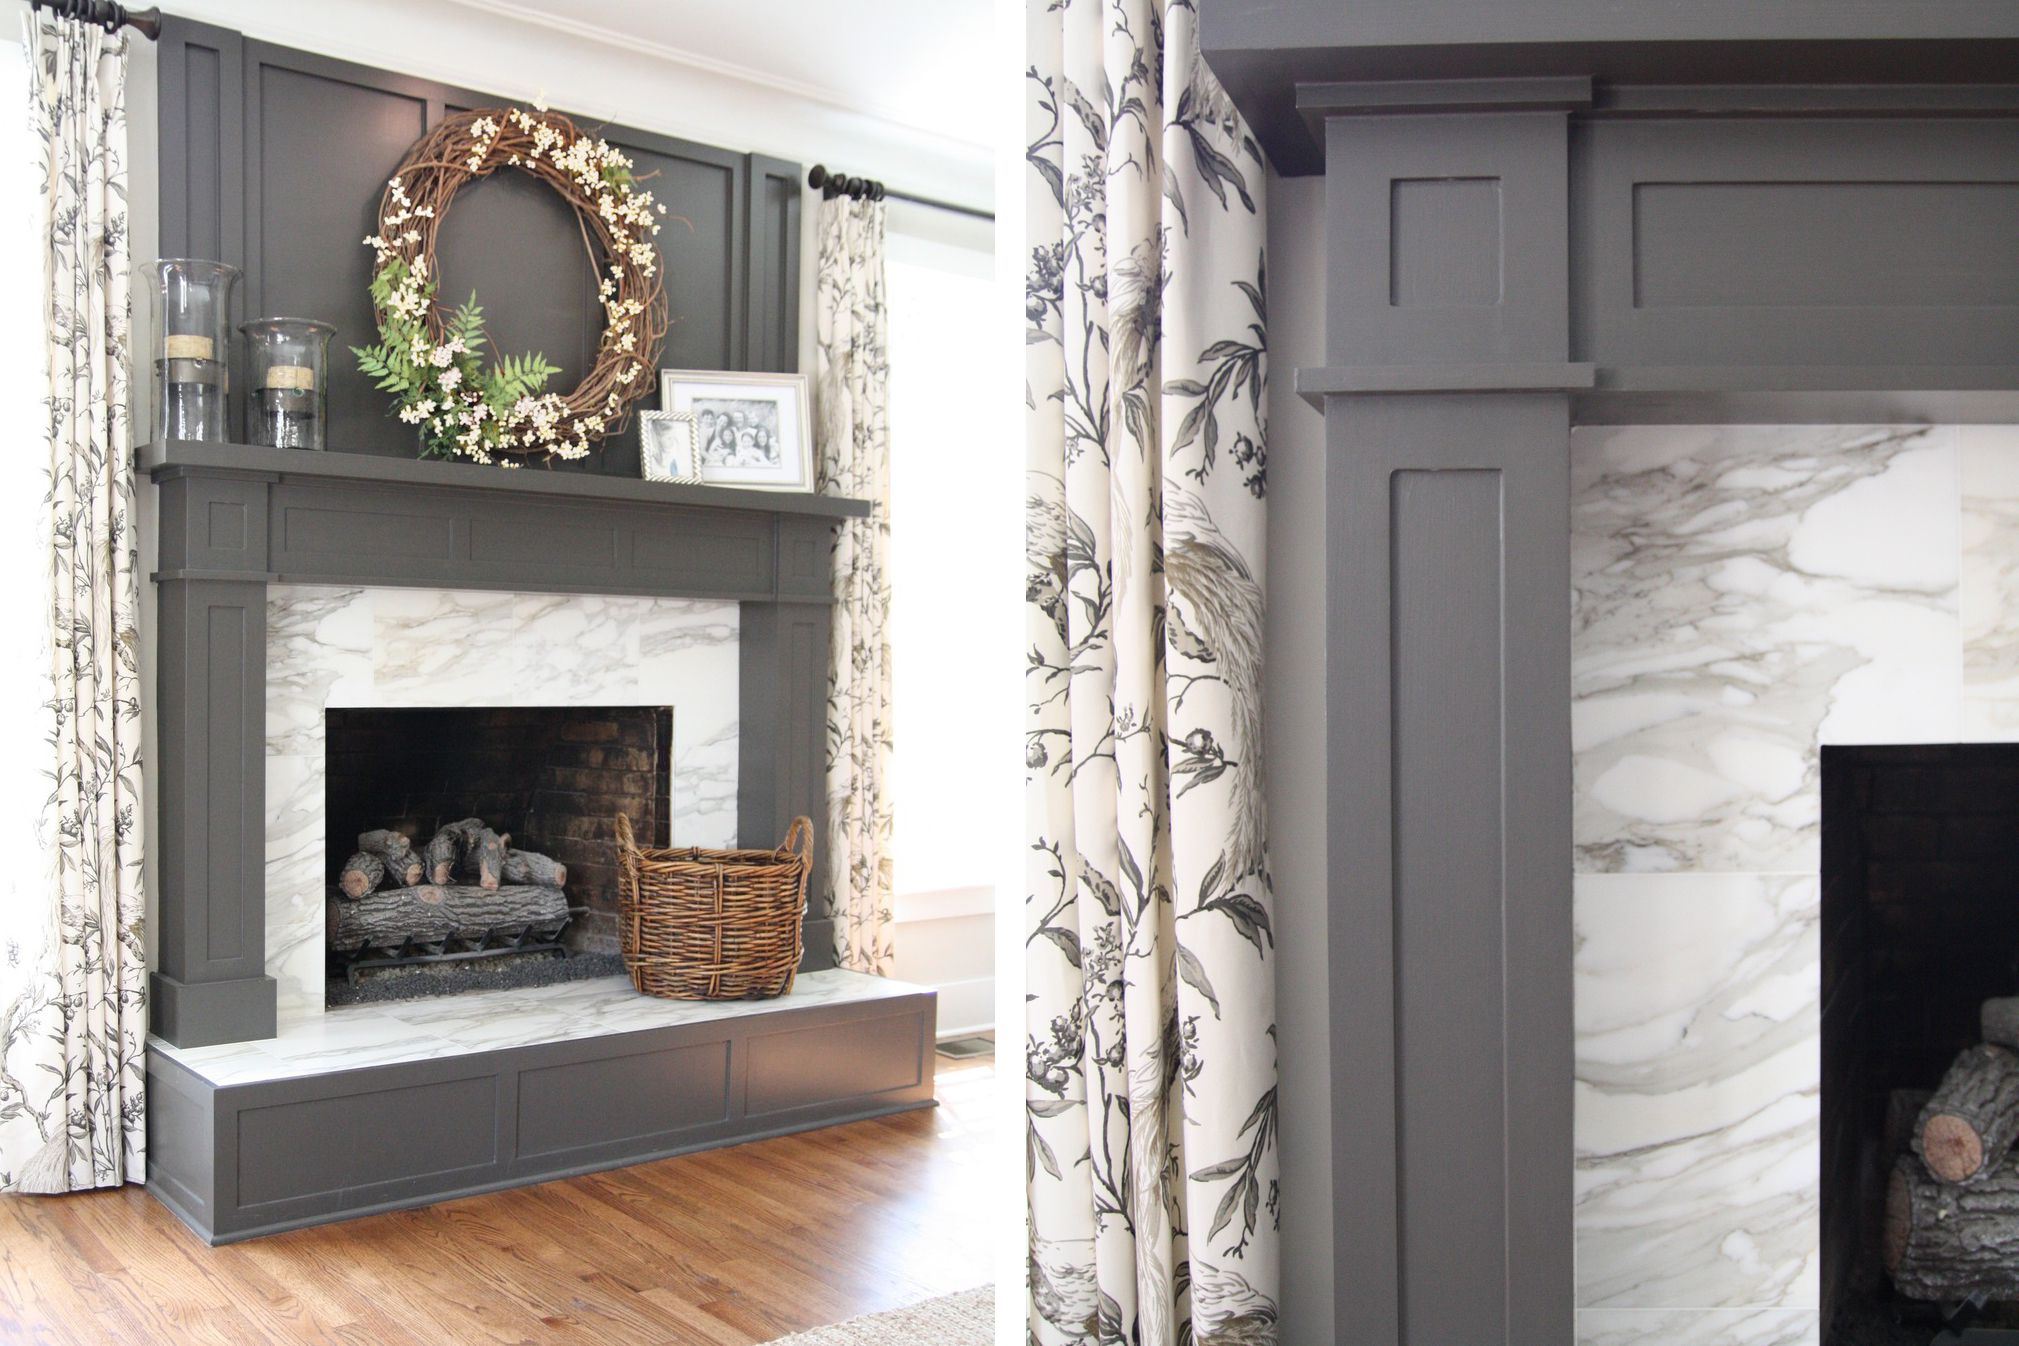 These gorgeous examples will help you find the perfect marble fireplace for your home and personal style.